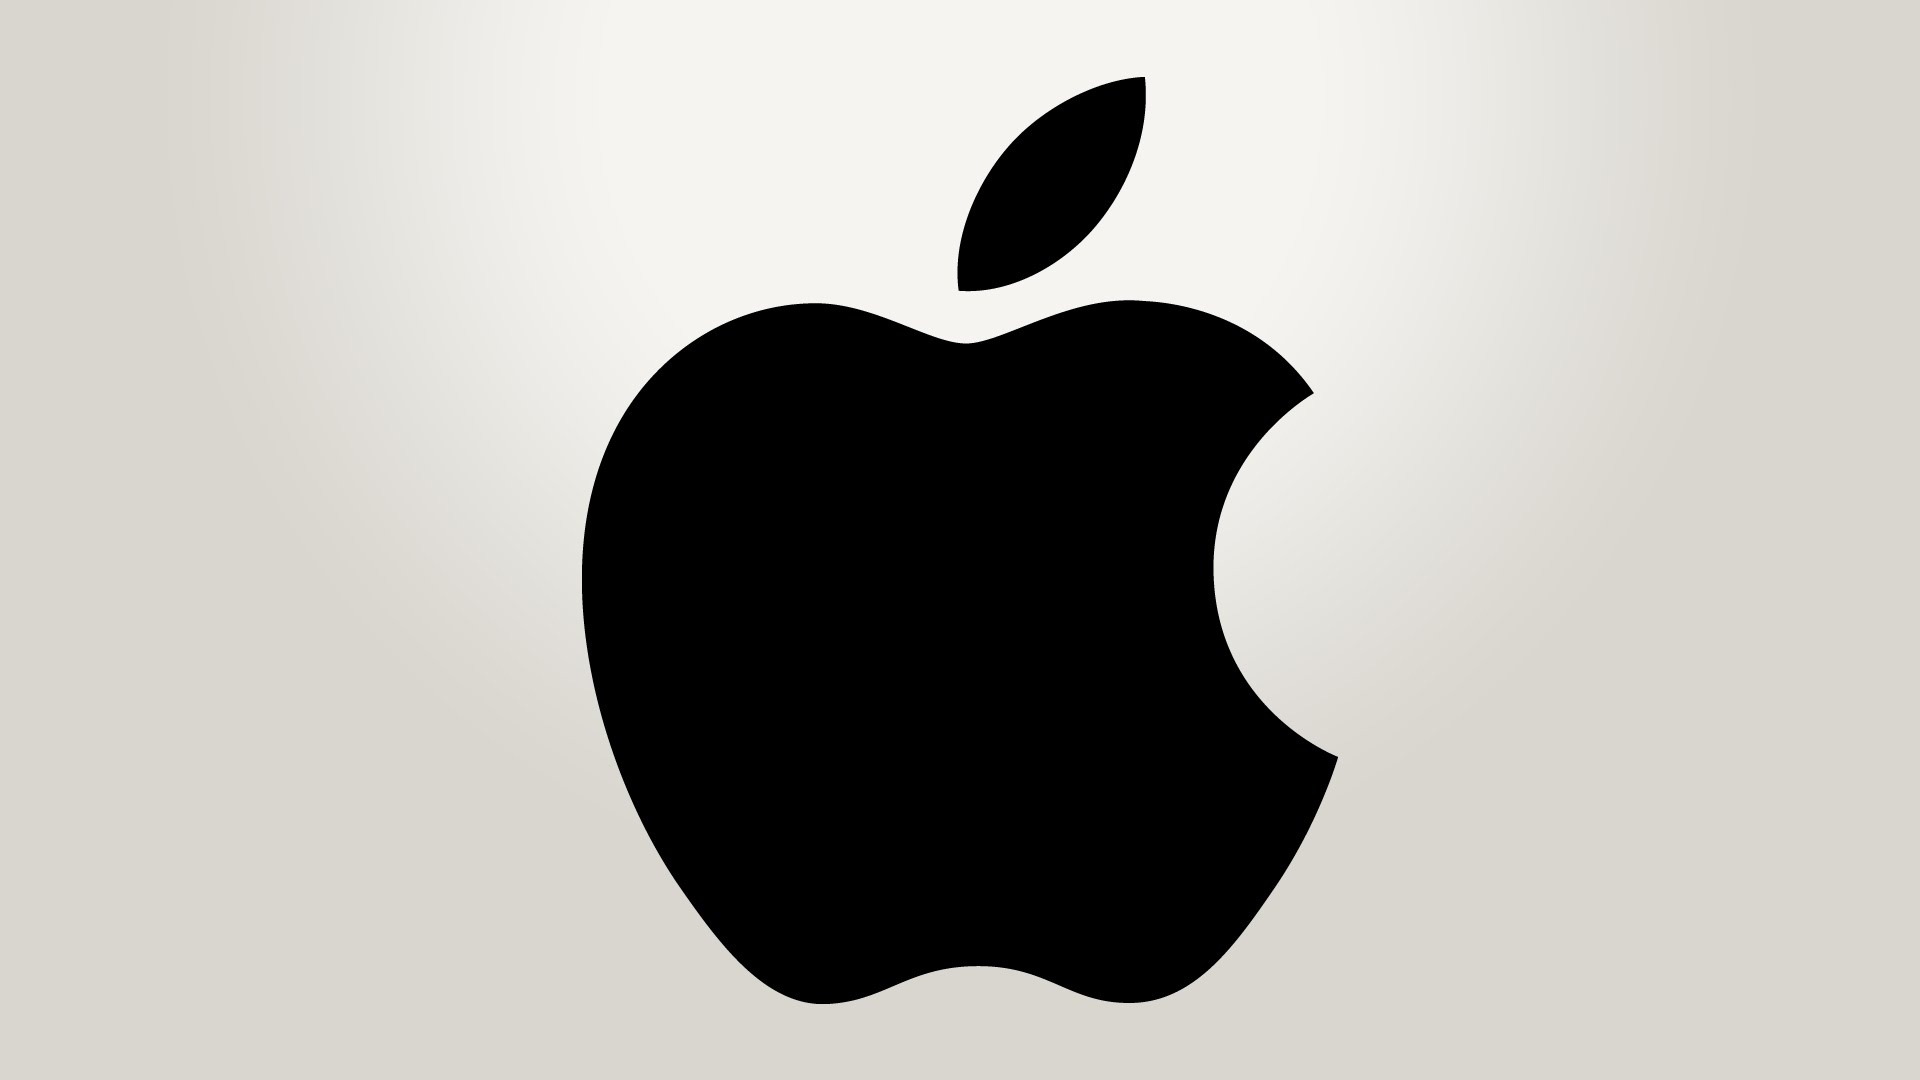 apple-logo-vector-at-getdrawings-free-for-personal-use-apple-logo